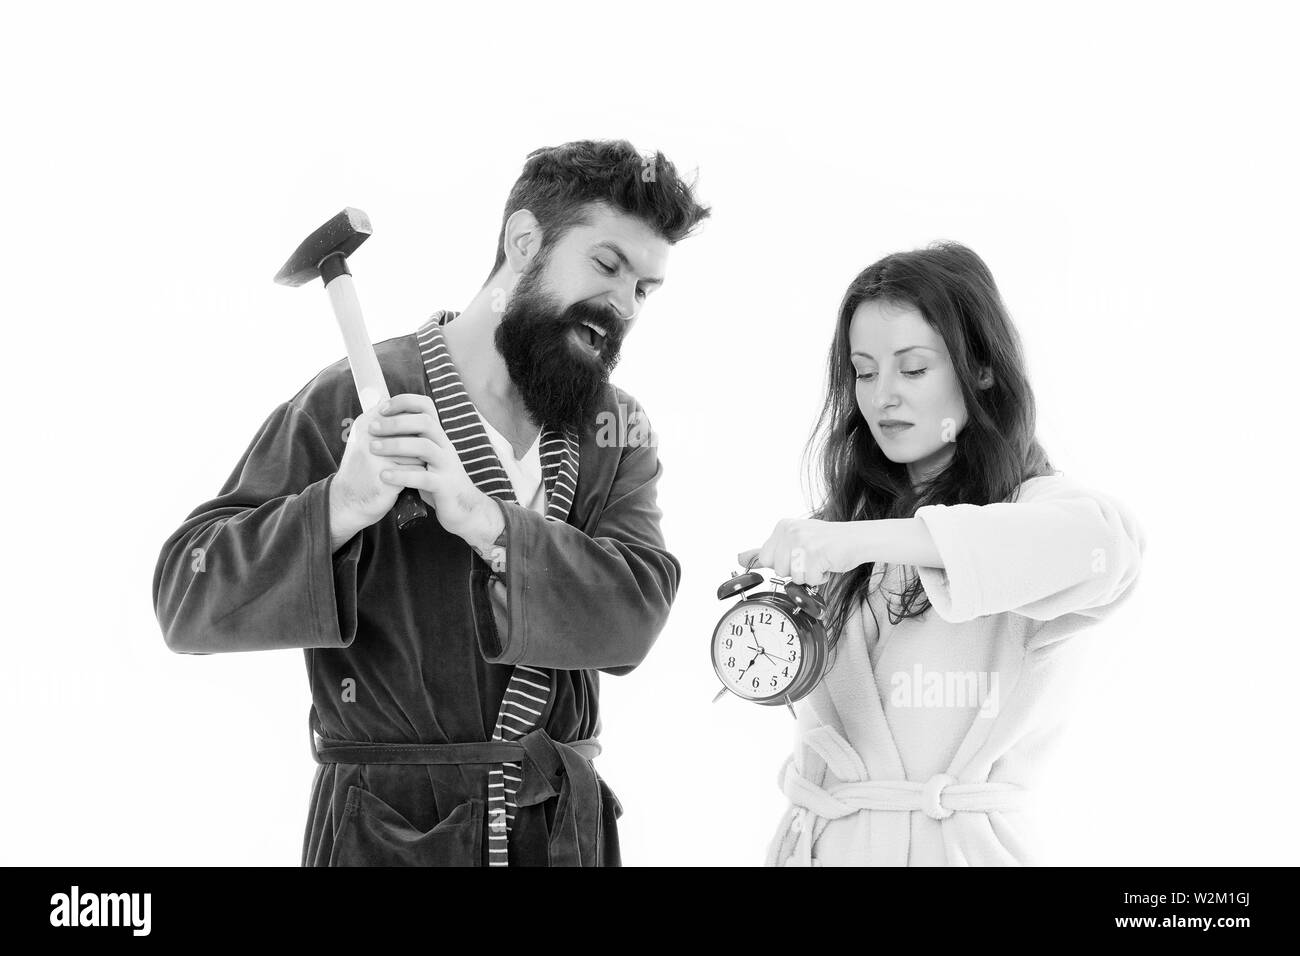 Lets get rid of this annoying alarm clock. Couple in bathrobes going to destroy alarm clock and stay at home. Breaking rules. Tired of early awakening. Man with hammer beat alarm clock. Hateful sound. Stock Photo